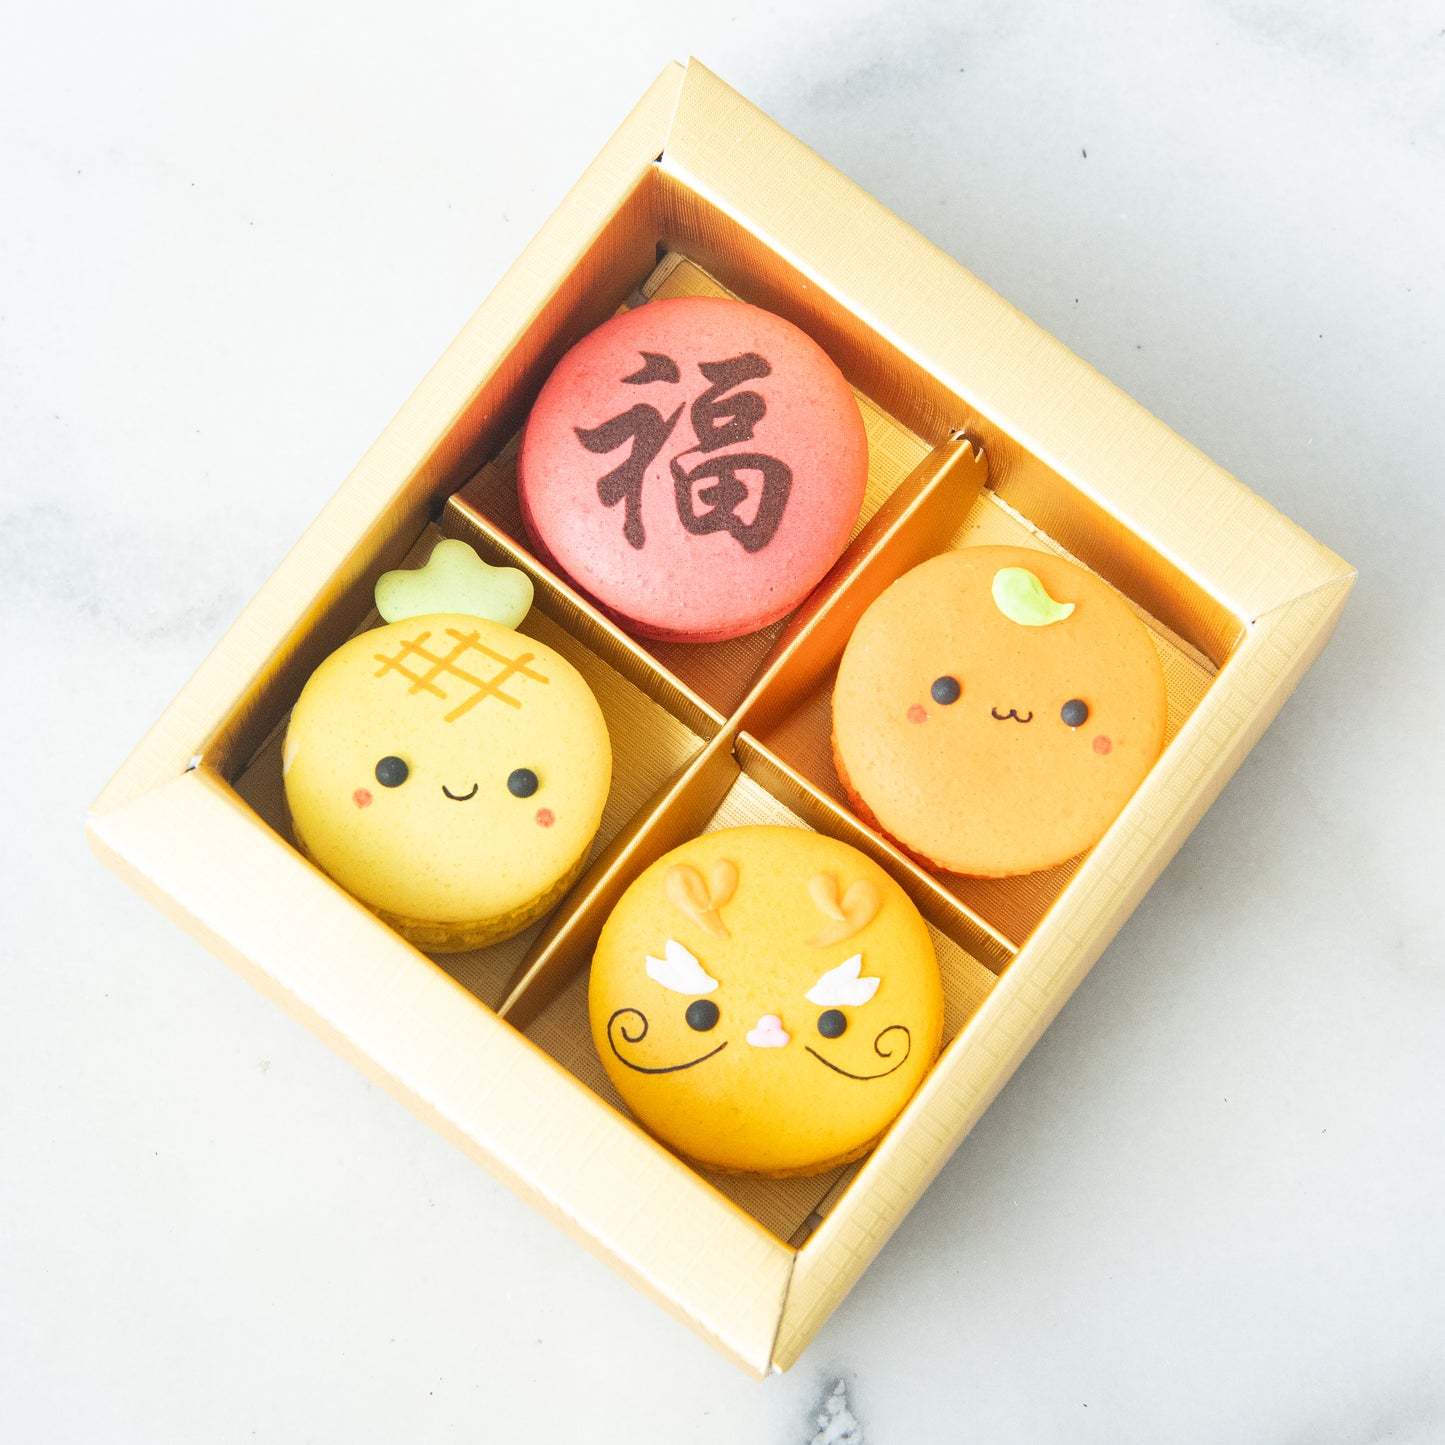 Year Of The Dragon! | 4in1 Golden Gems in Gift Box | $10.80 Nett only